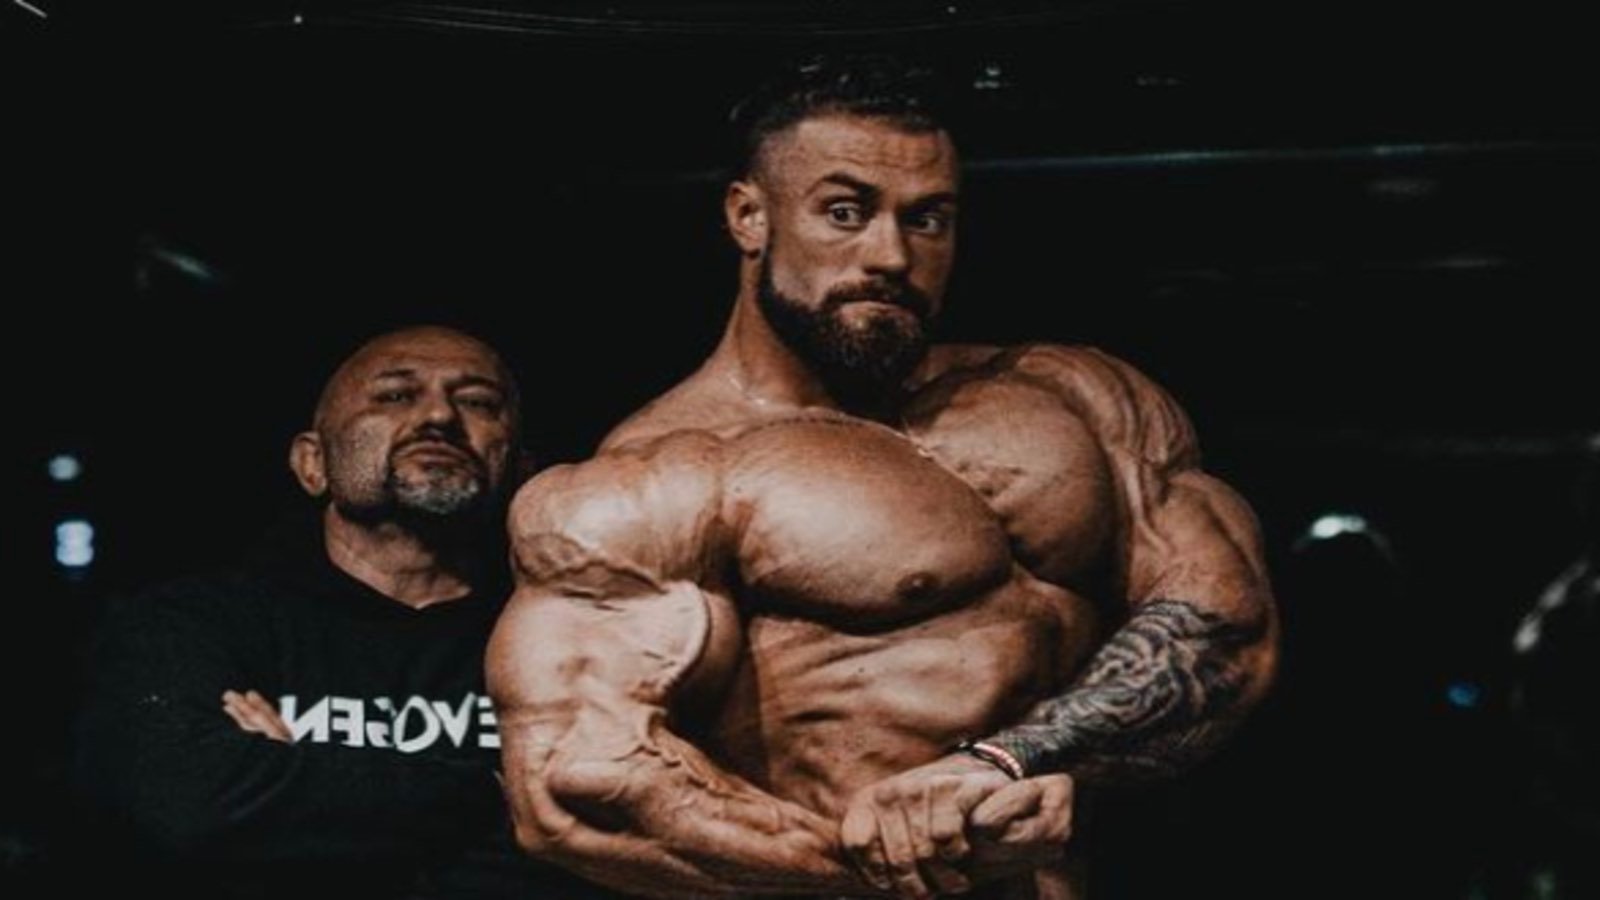 chris-bumstead-is-building-his-own-private-gym-–-breaking-muscle